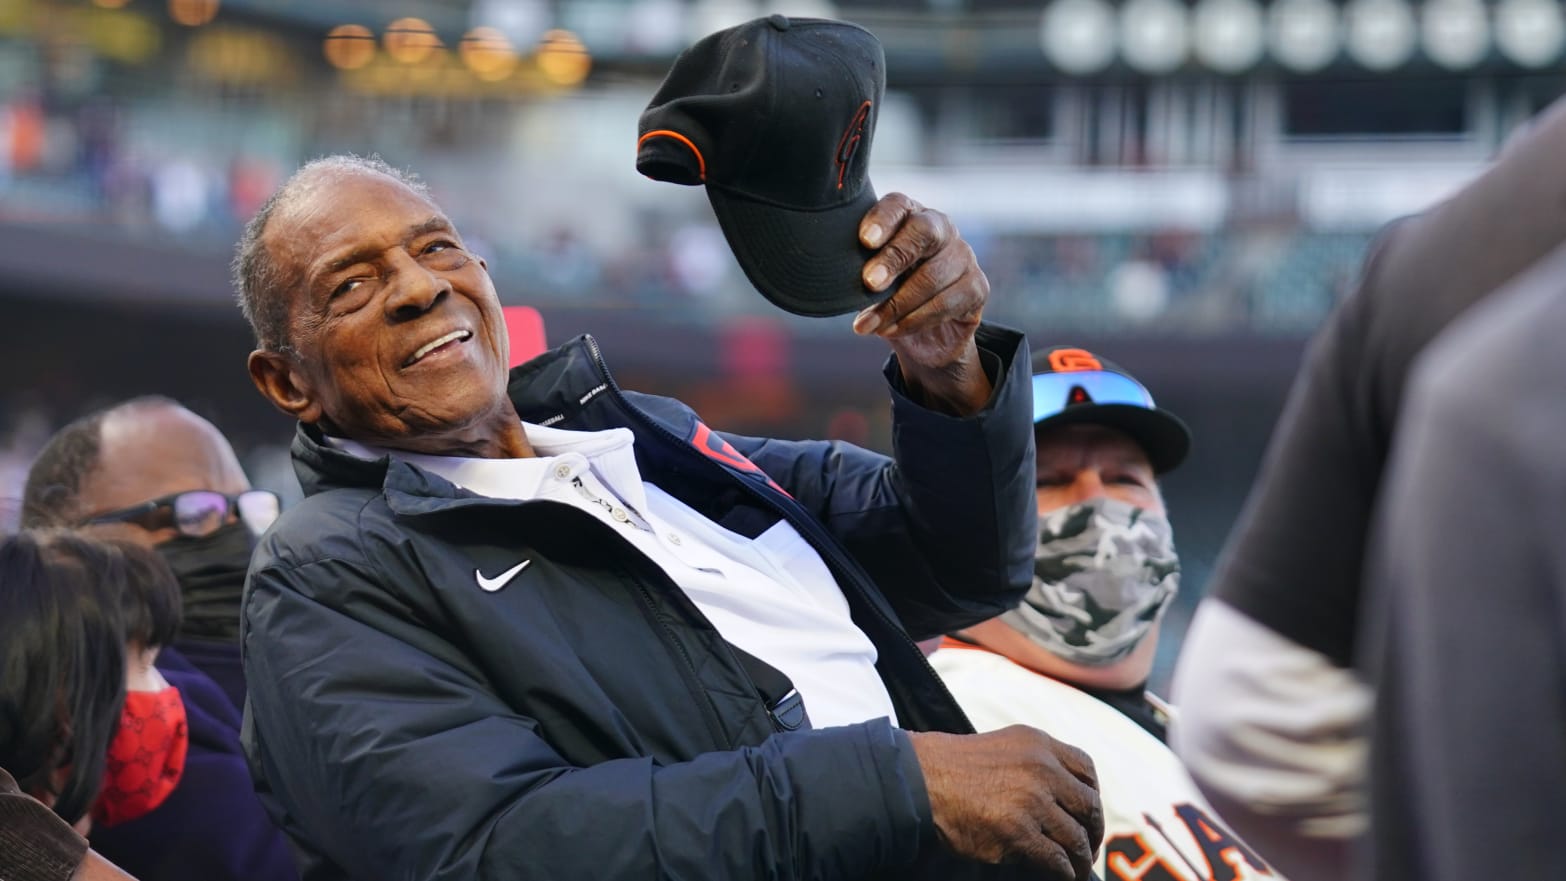 Hall of Famer Willie Mays waves to the crowd during the pre-game celebration in honor of his 90th birthday prior to the game between the San Diego Padres and the San Francisco Giants at Oracle Park on Friday, May 7, 2021 in San Francisco, California. 